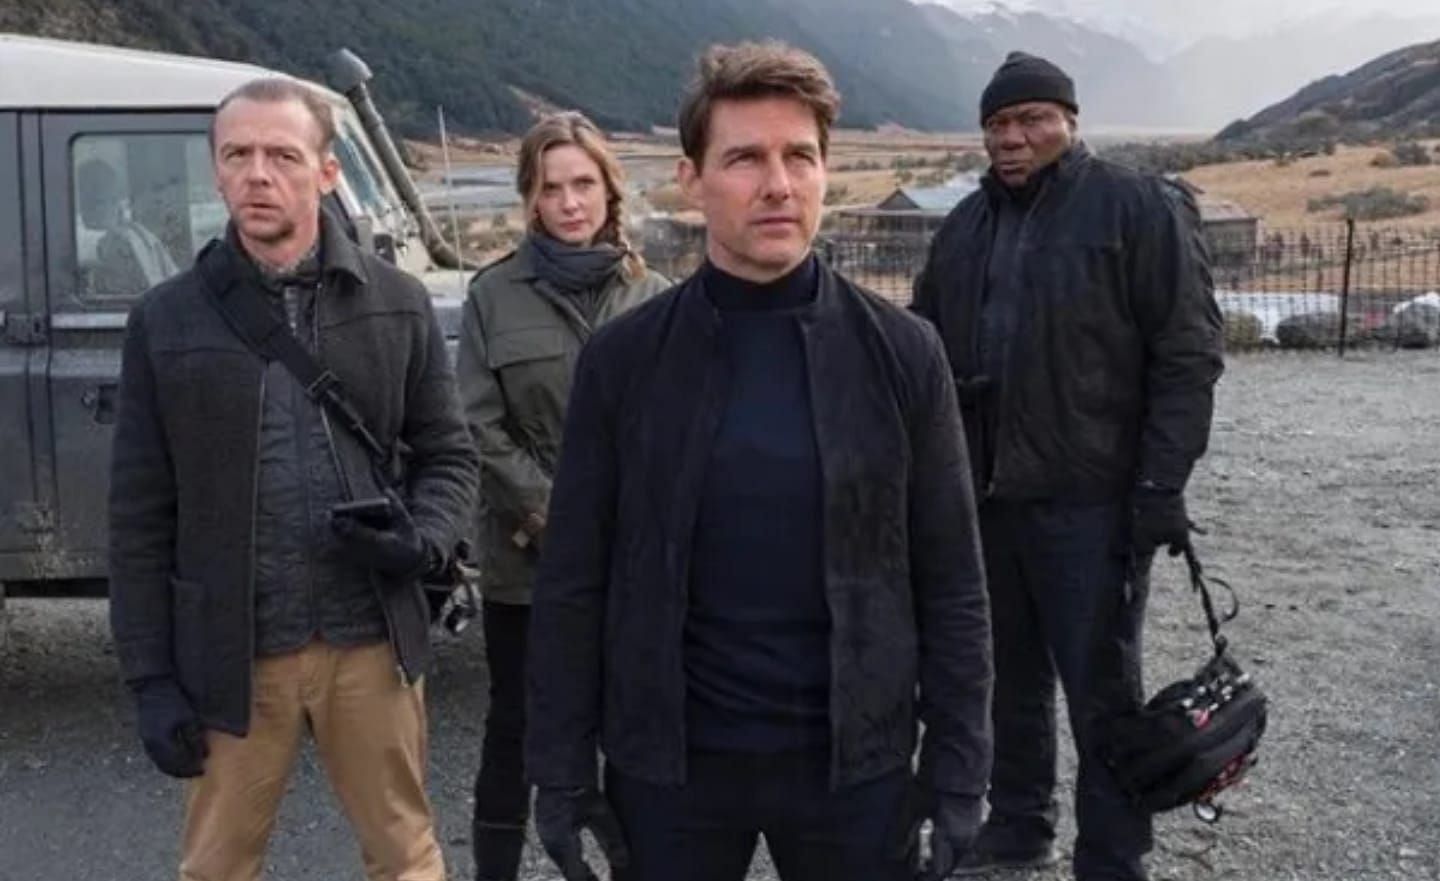 Where to watch Mission: Impossible movies?